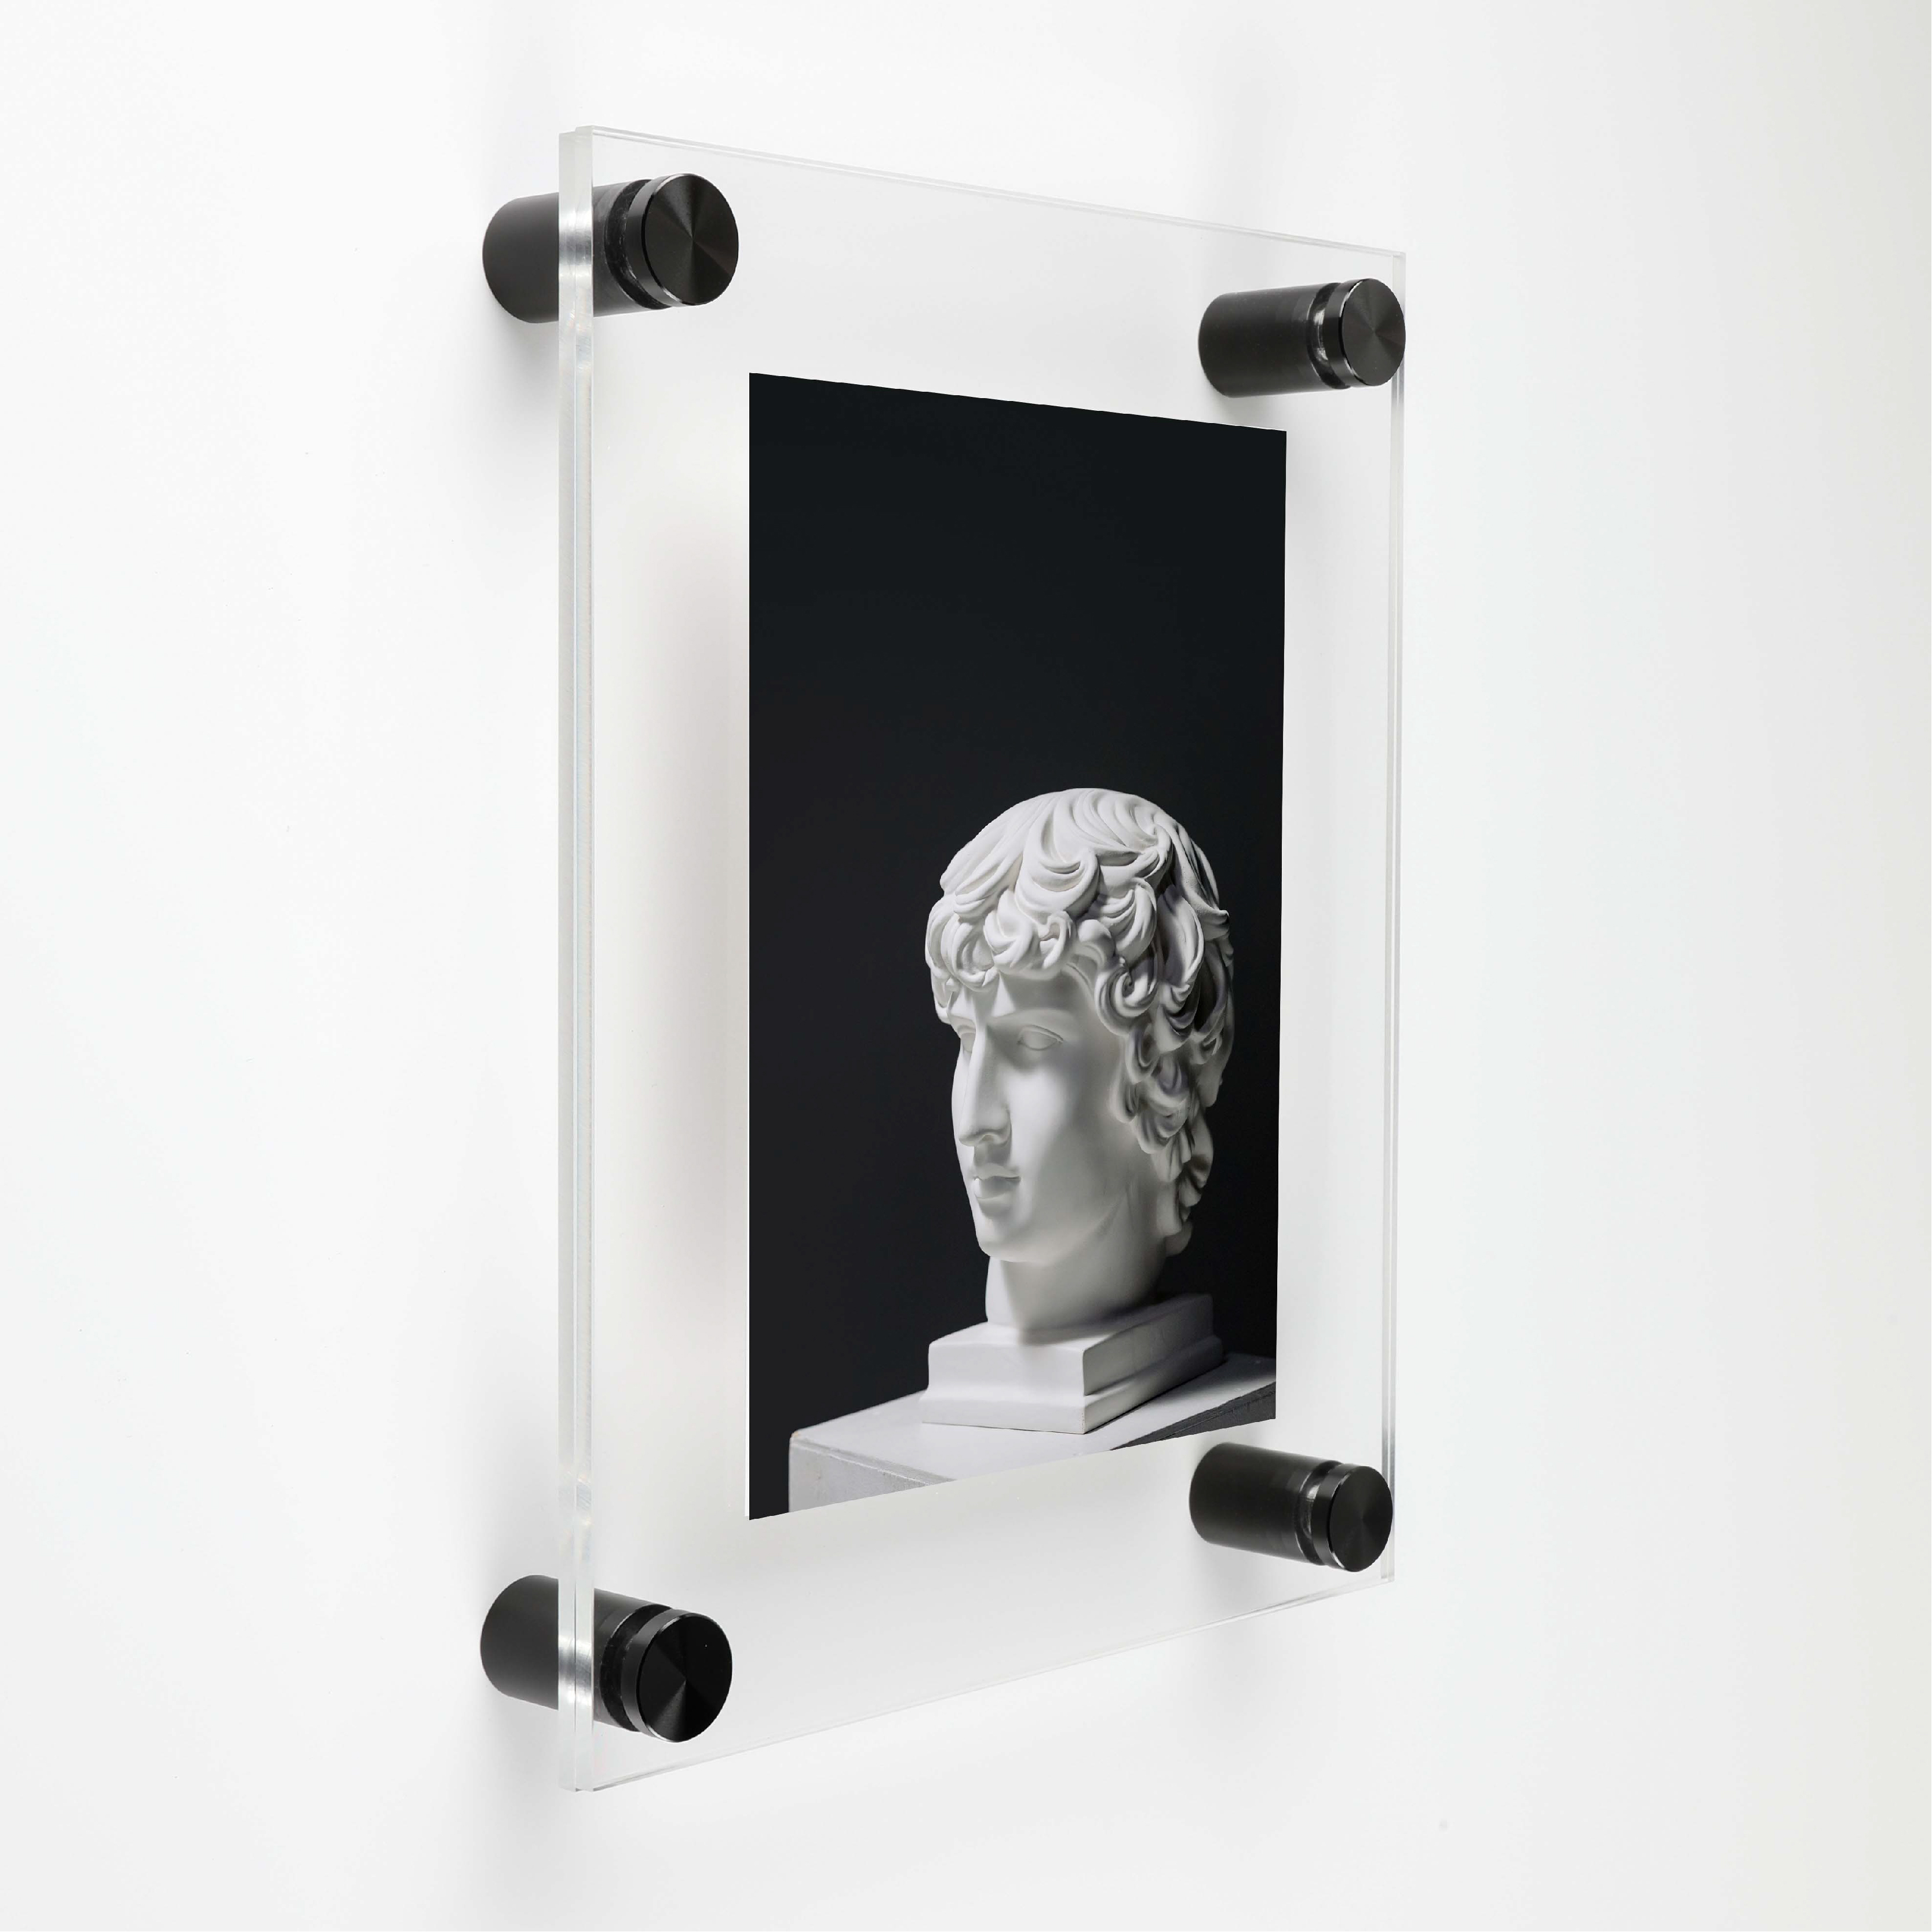 (2) 13-1/2'' x 16-1/2'' Clear Acrylics , Pre-Drilled With Polished Edges (Thick 1/8'' each), Wall Frame with (4) 3/4'' x 1'' Black Anodized Aluminum Standoffs includes Screws and Anchors